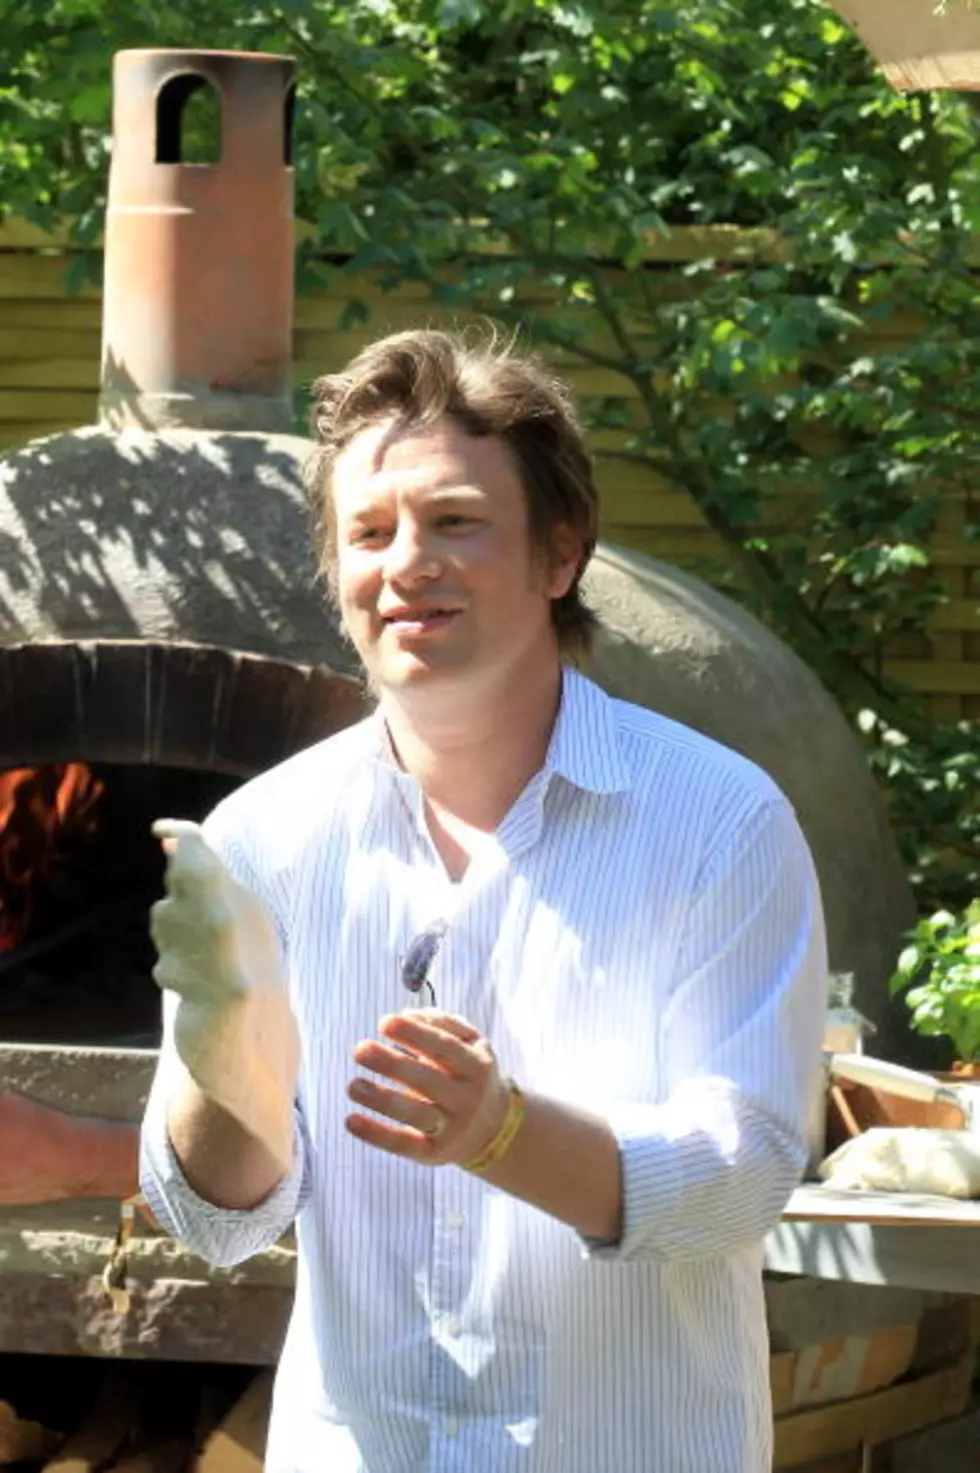 Health-Focused Jamie Oliver&#8217;s Cookbook Named One Of 2011&#8217;s Most Unhealthy